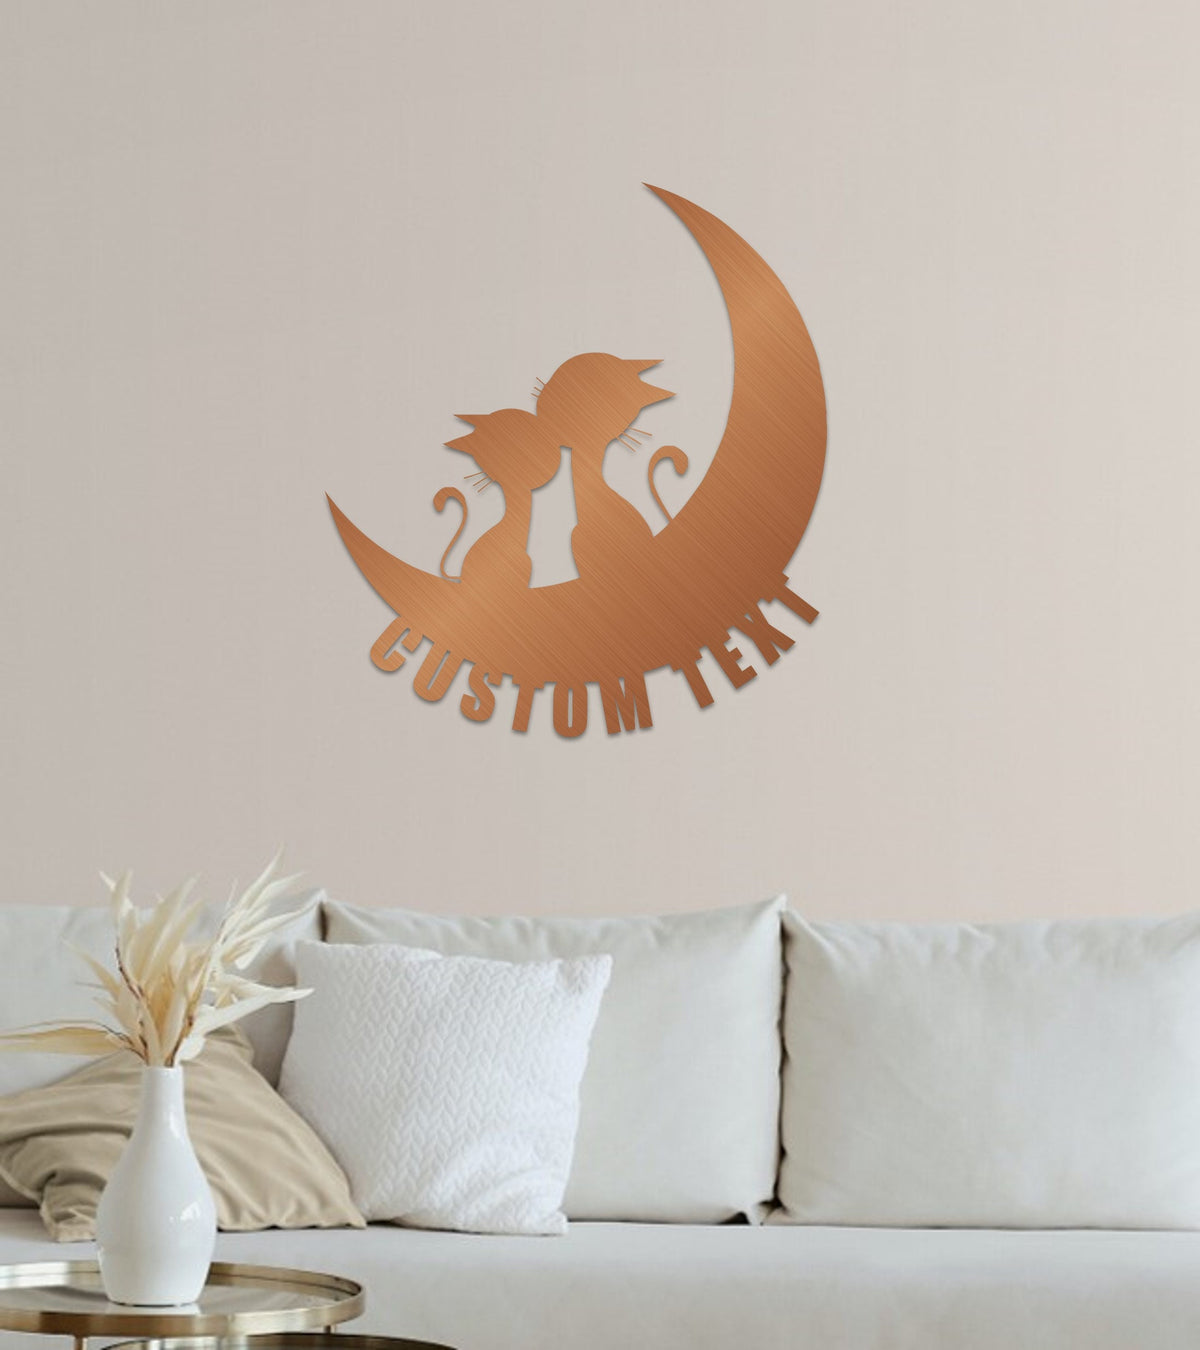 Cats and Moon Metal Wall Art and Customized Modern Decor